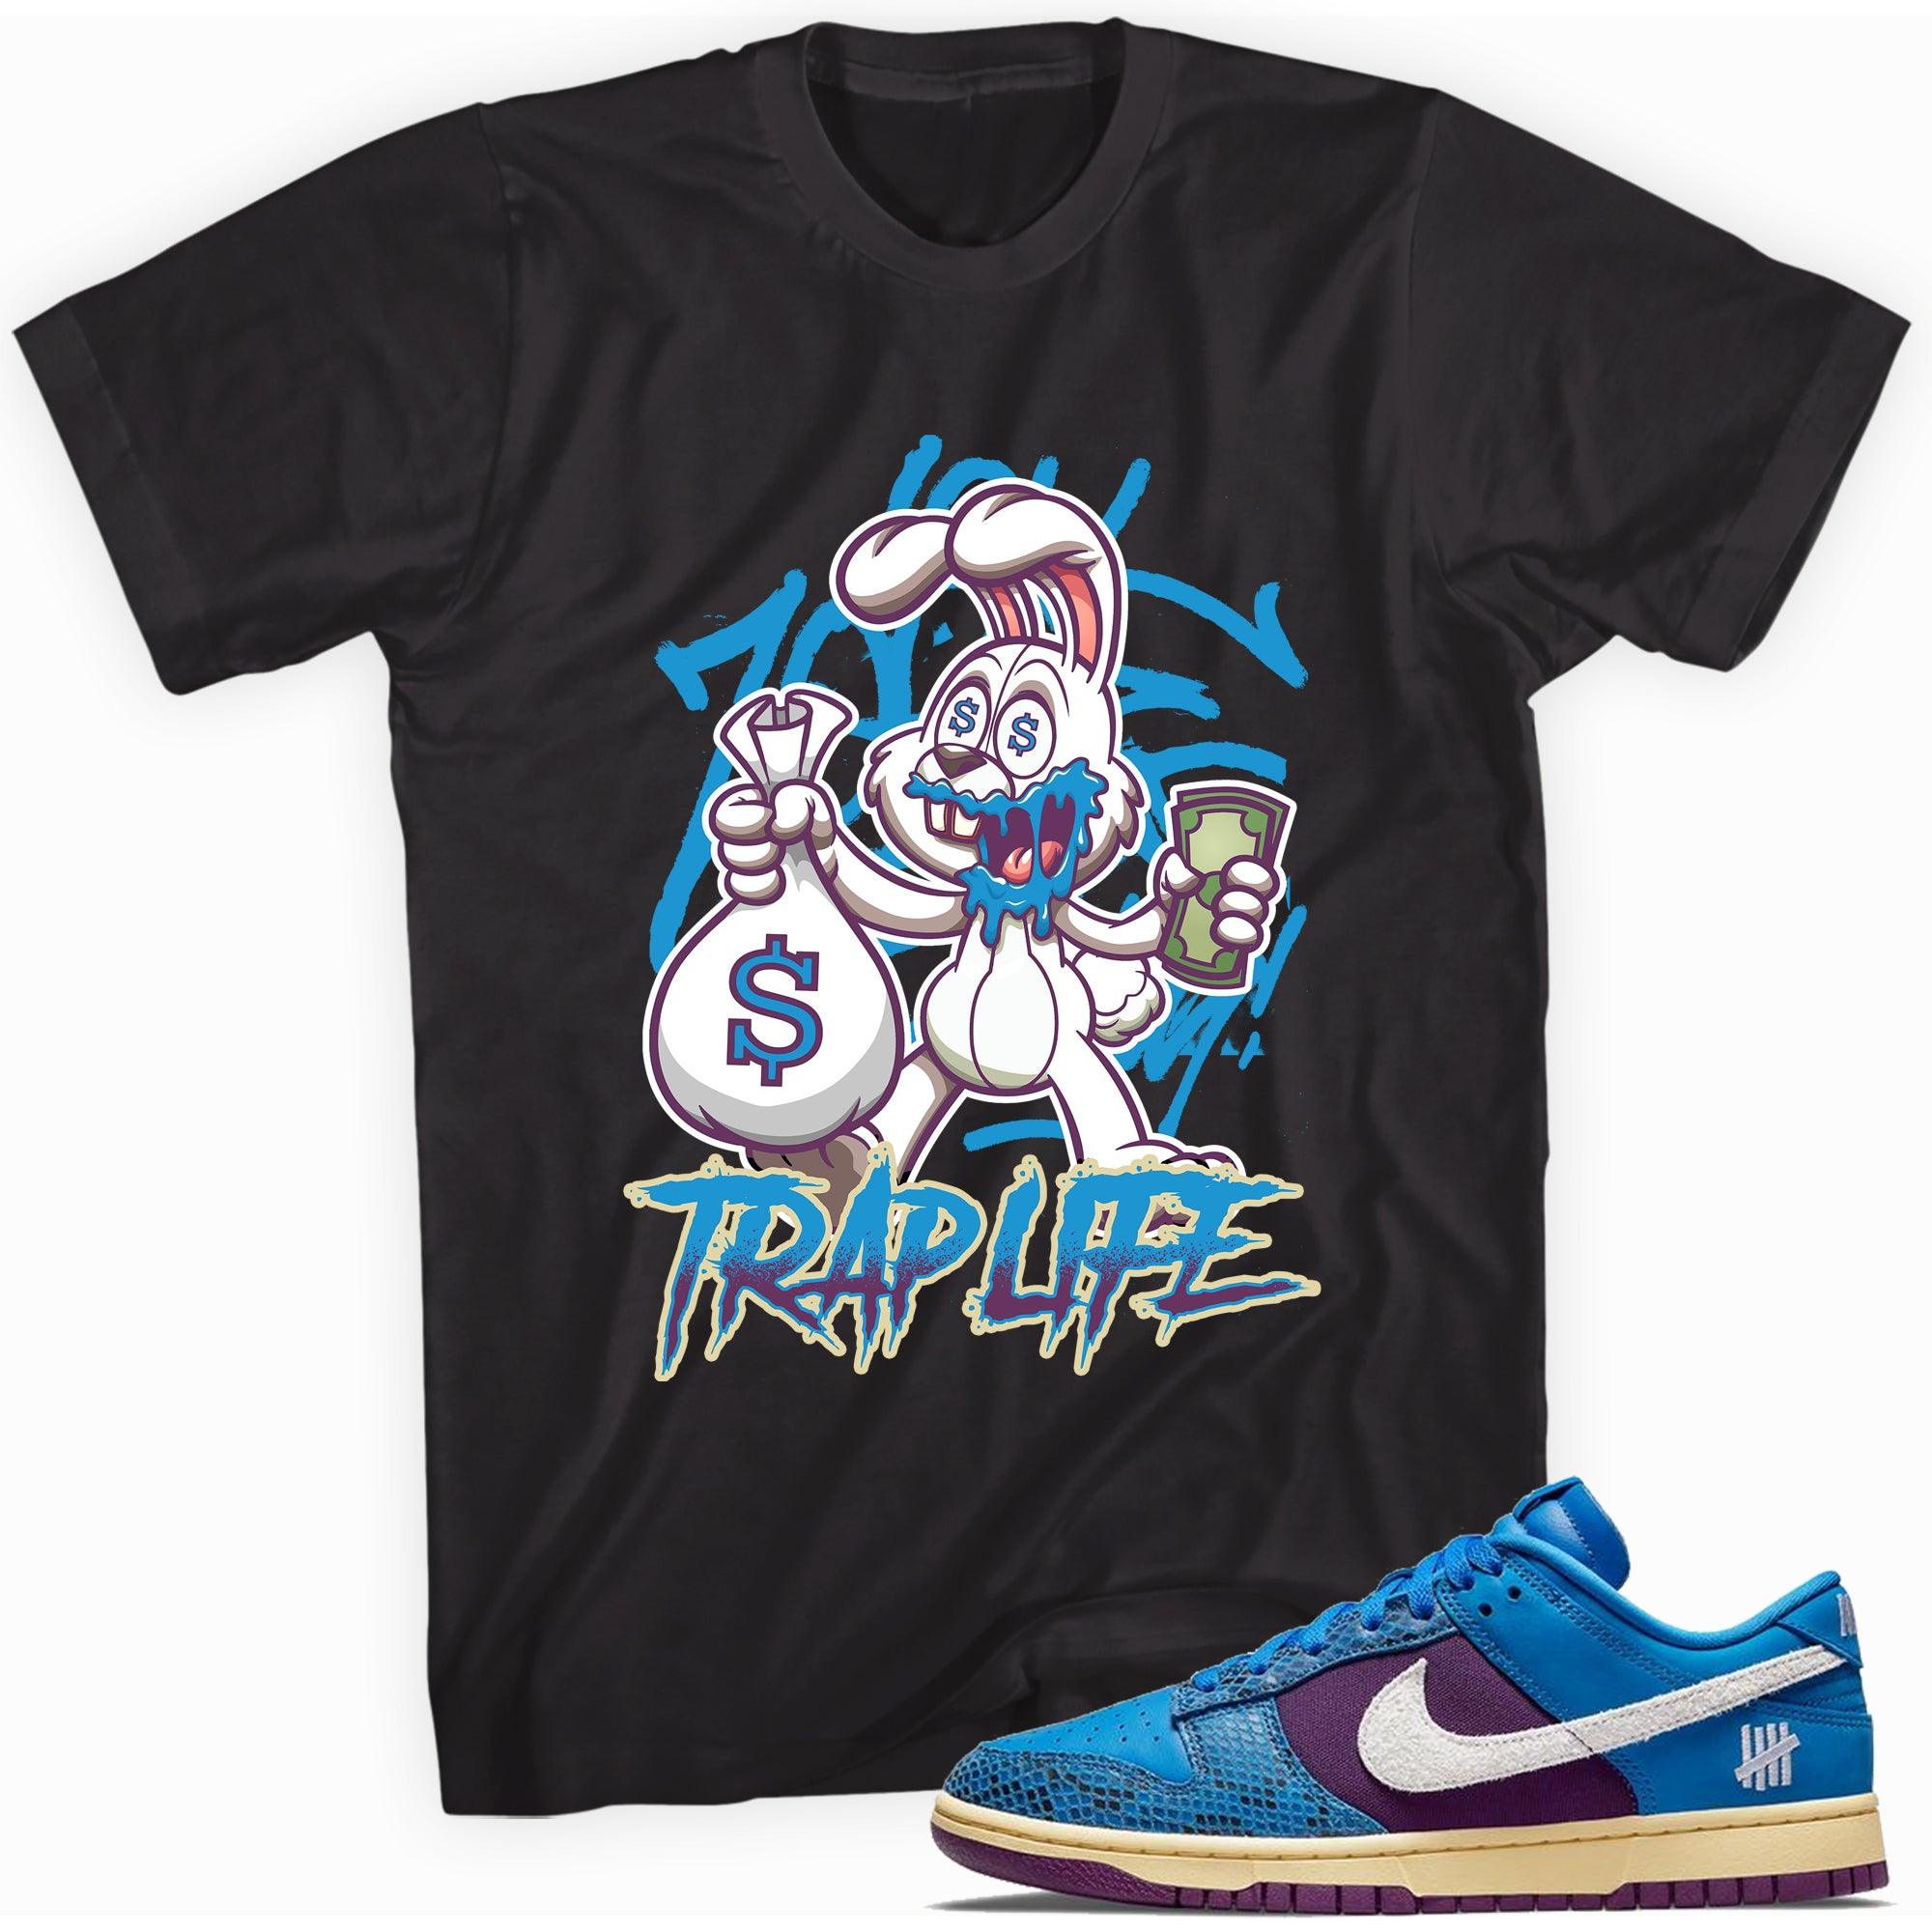 Black Trap Life Shirt Nike Dunk Low Undefeated 5 On It Dunk vs AF1 photo